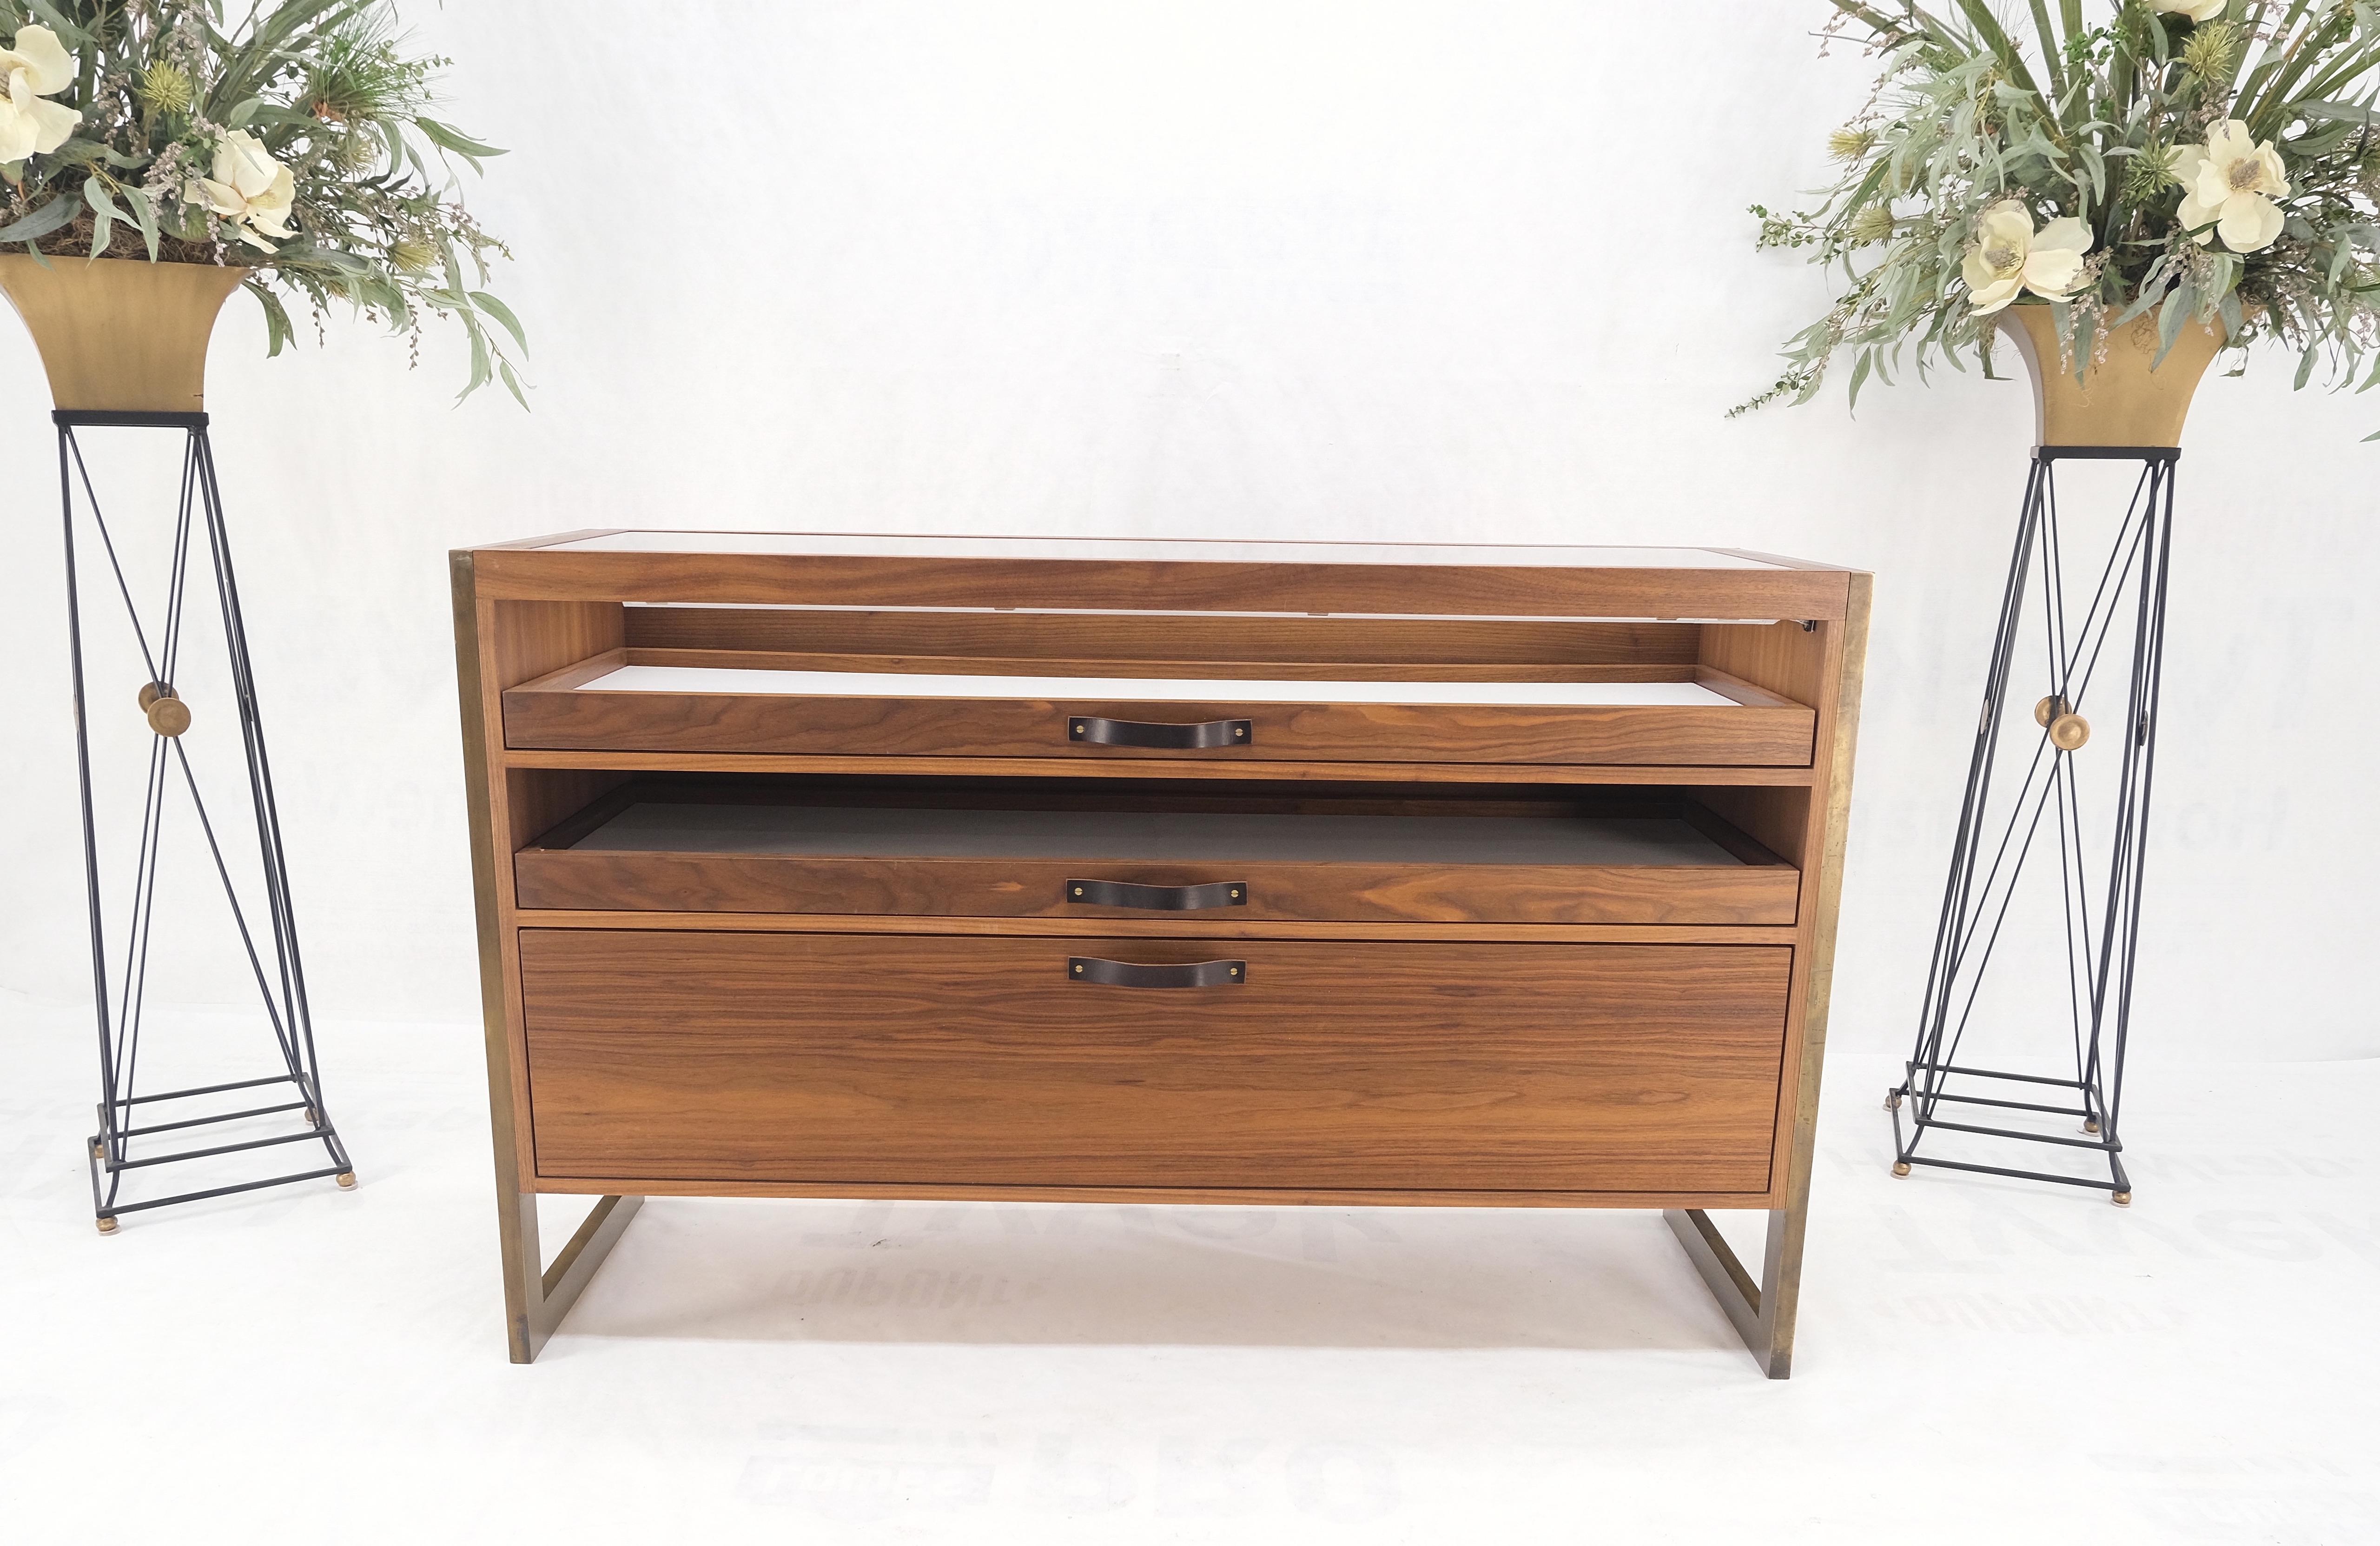 Unusual Mid-Century Modern Solid Walnut Console Sofa Table with Drawers MINT!